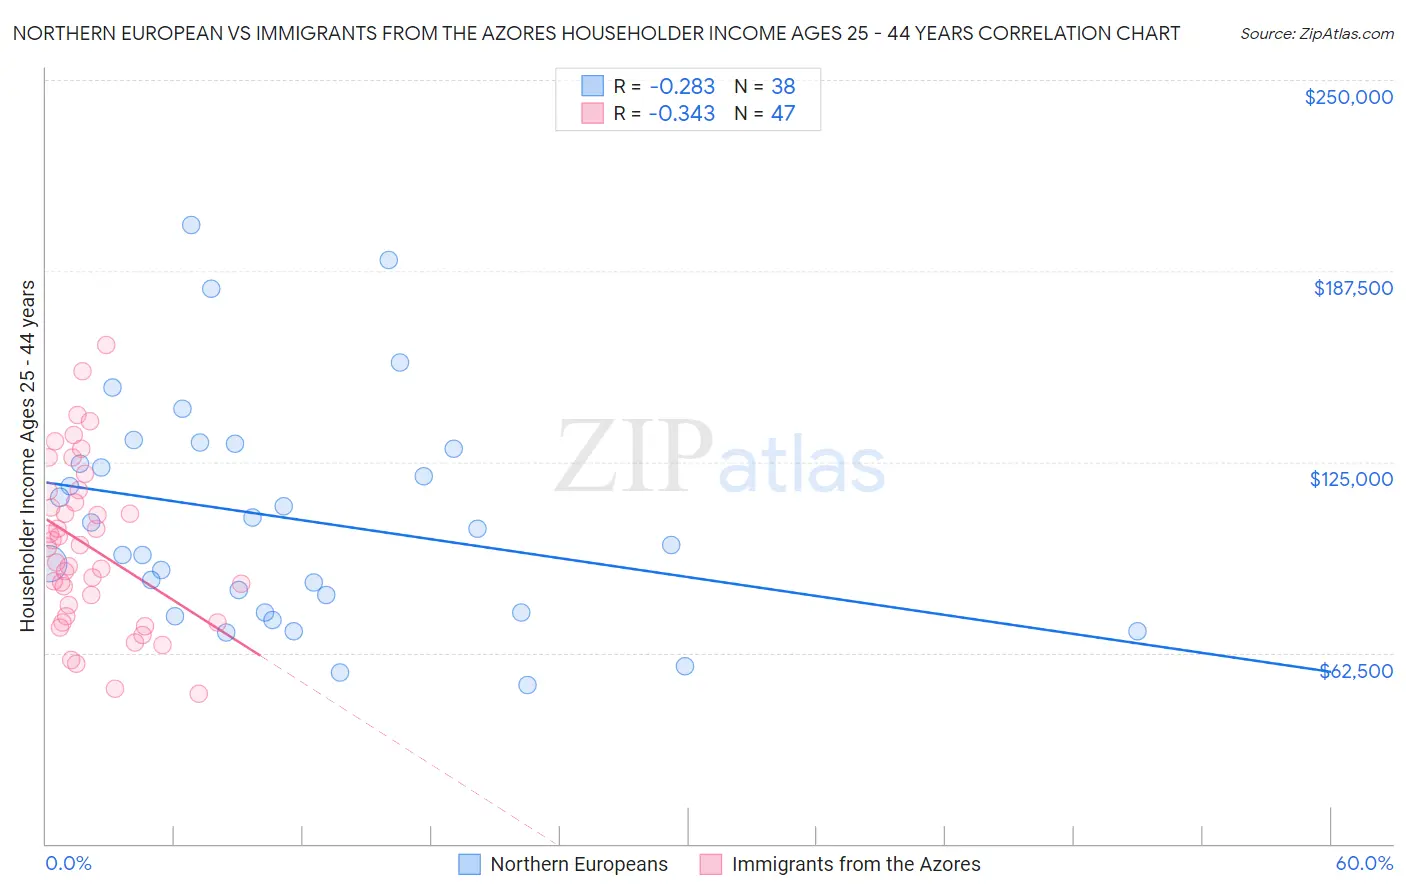 Northern European vs Immigrants from the Azores Householder Income Ages 25 - 44 years